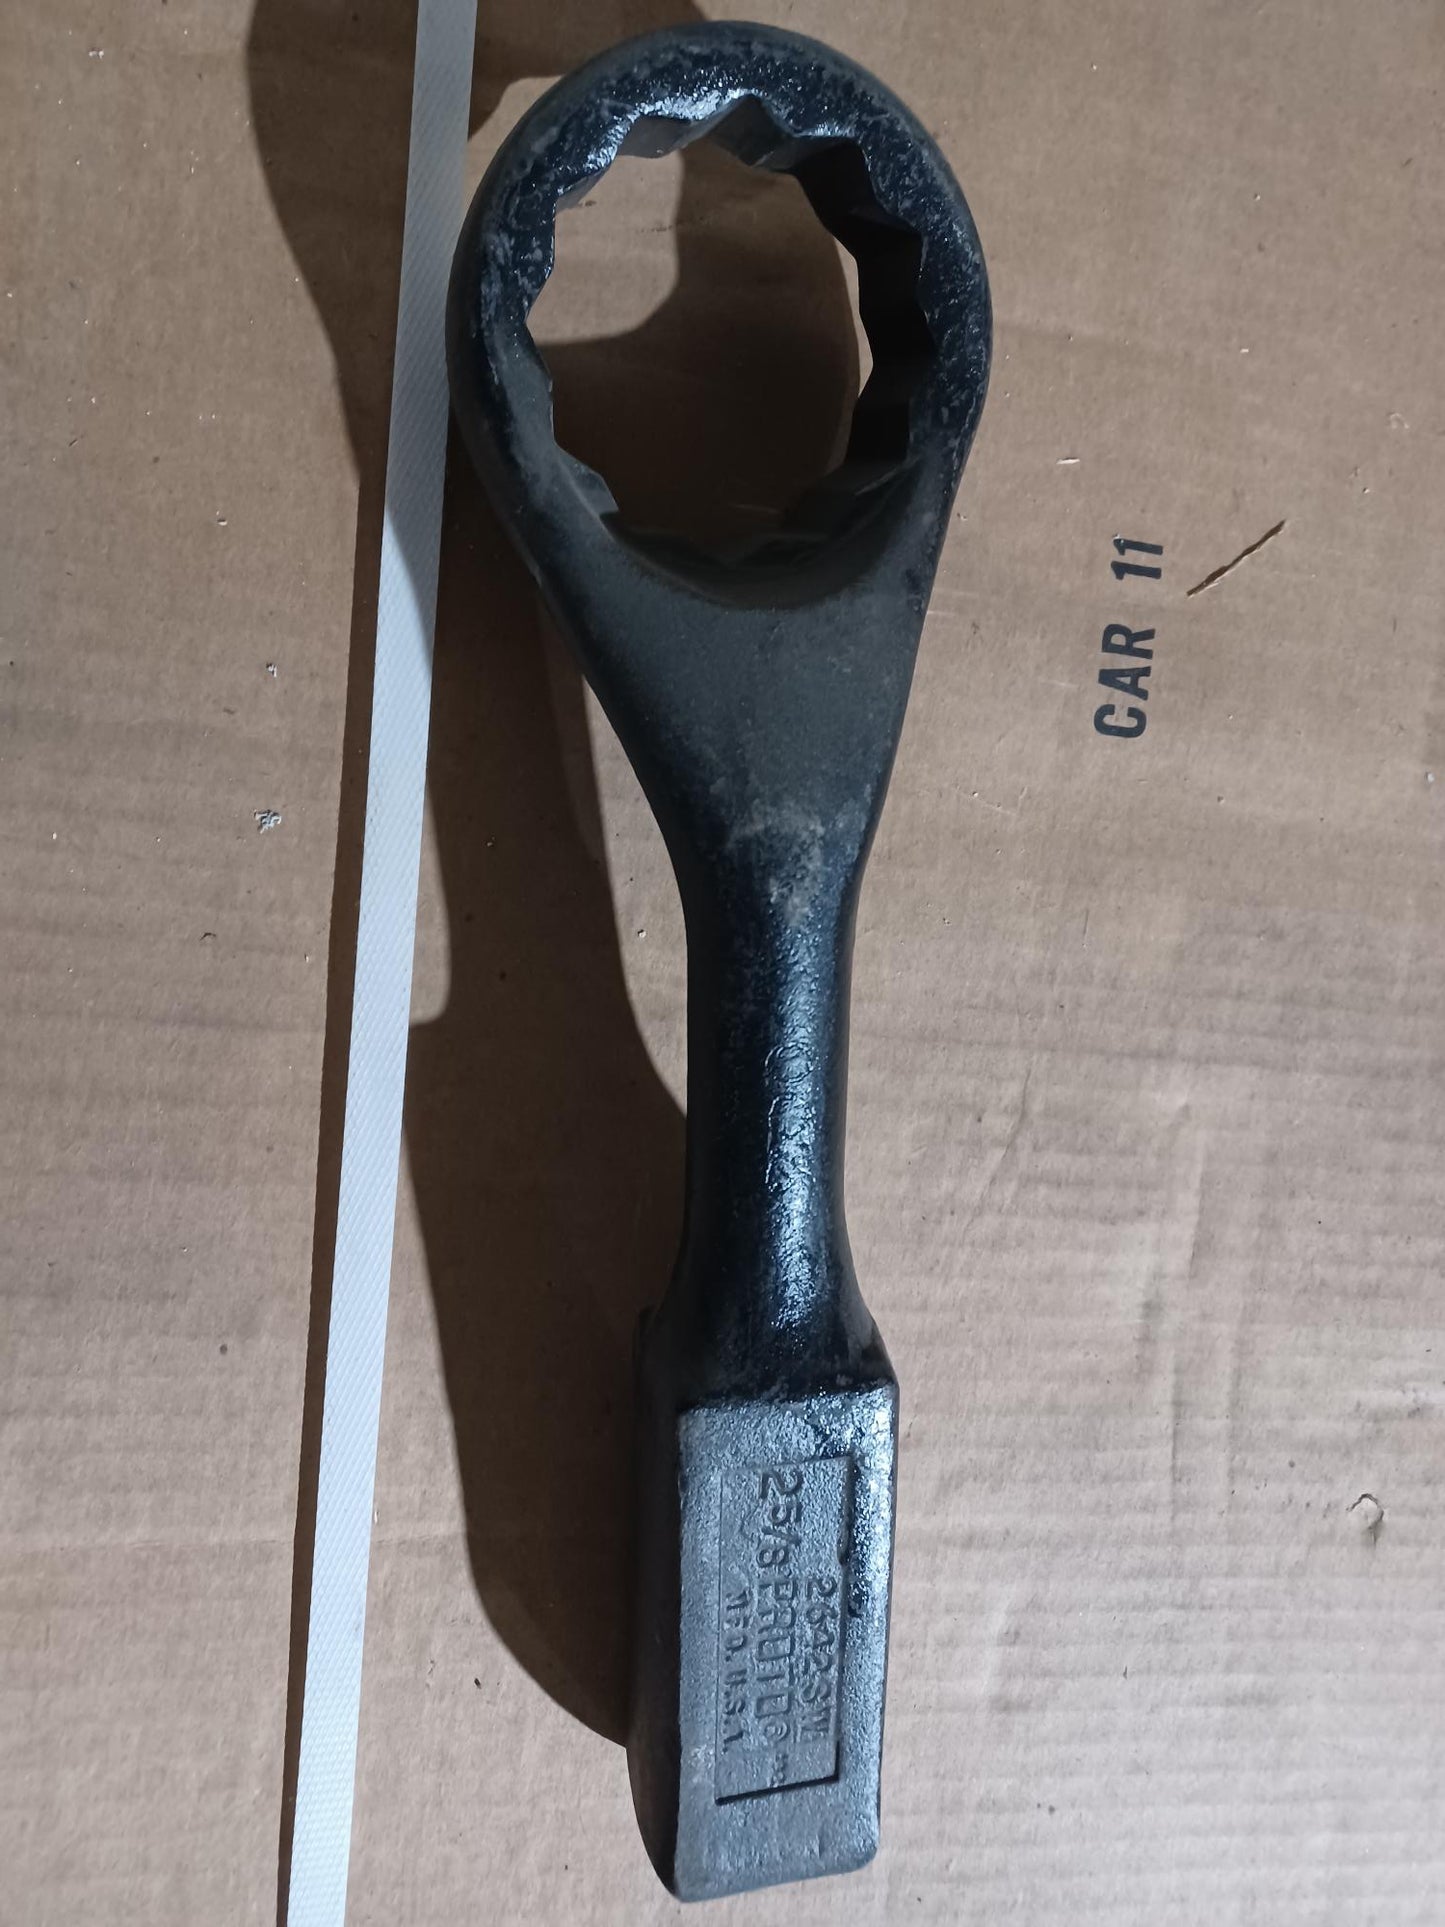 Knocker Wrench 2-5/8 in. Offset Striking Wrench - Used Ready to Ship